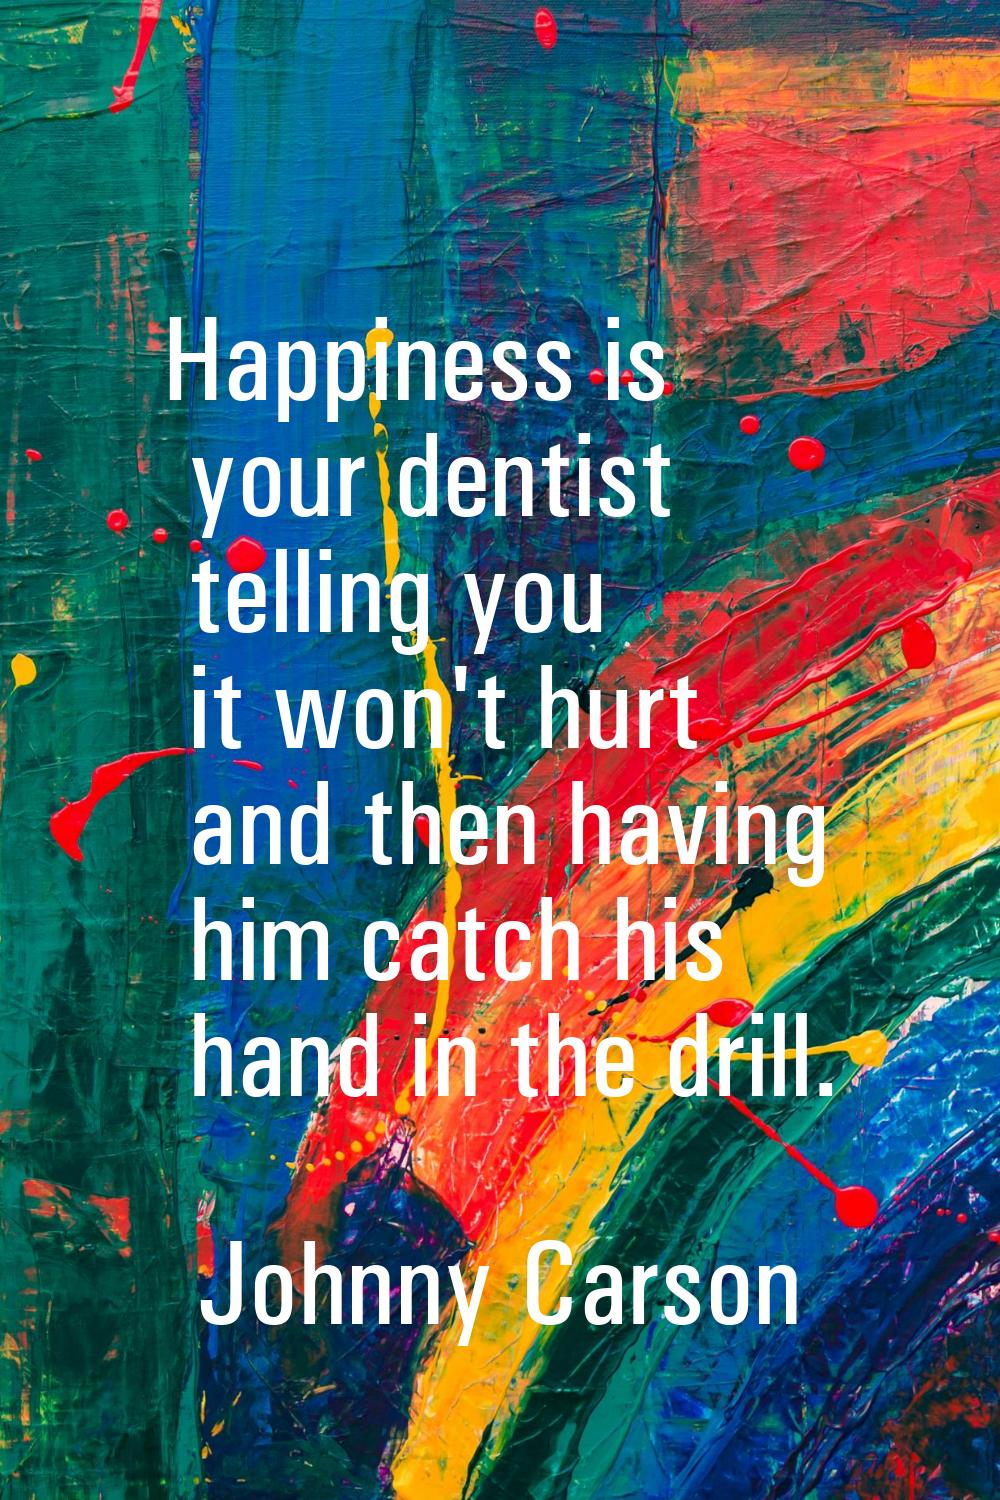 Happiness is your dentist telling you it won't hurt and then having him catch his hand in the drill